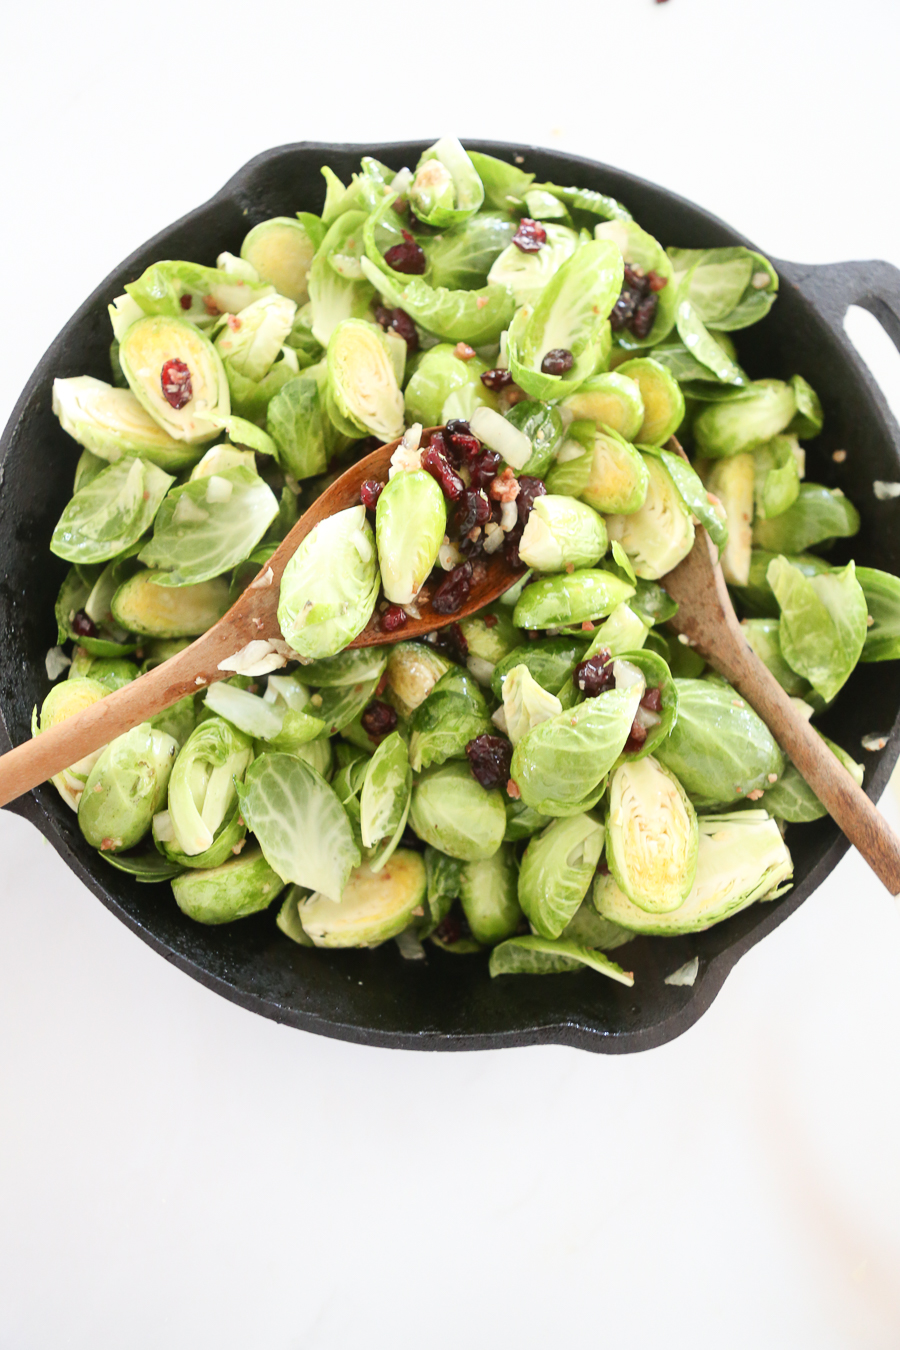 CC AND MIKE'S EXTRA CRISPY CANDIED BRUSSEL SPROUTS RECIPE brussel sprouts with organic maple syrup craisins and real bacon pieces setting on the pioneer woman cutting boards and knives